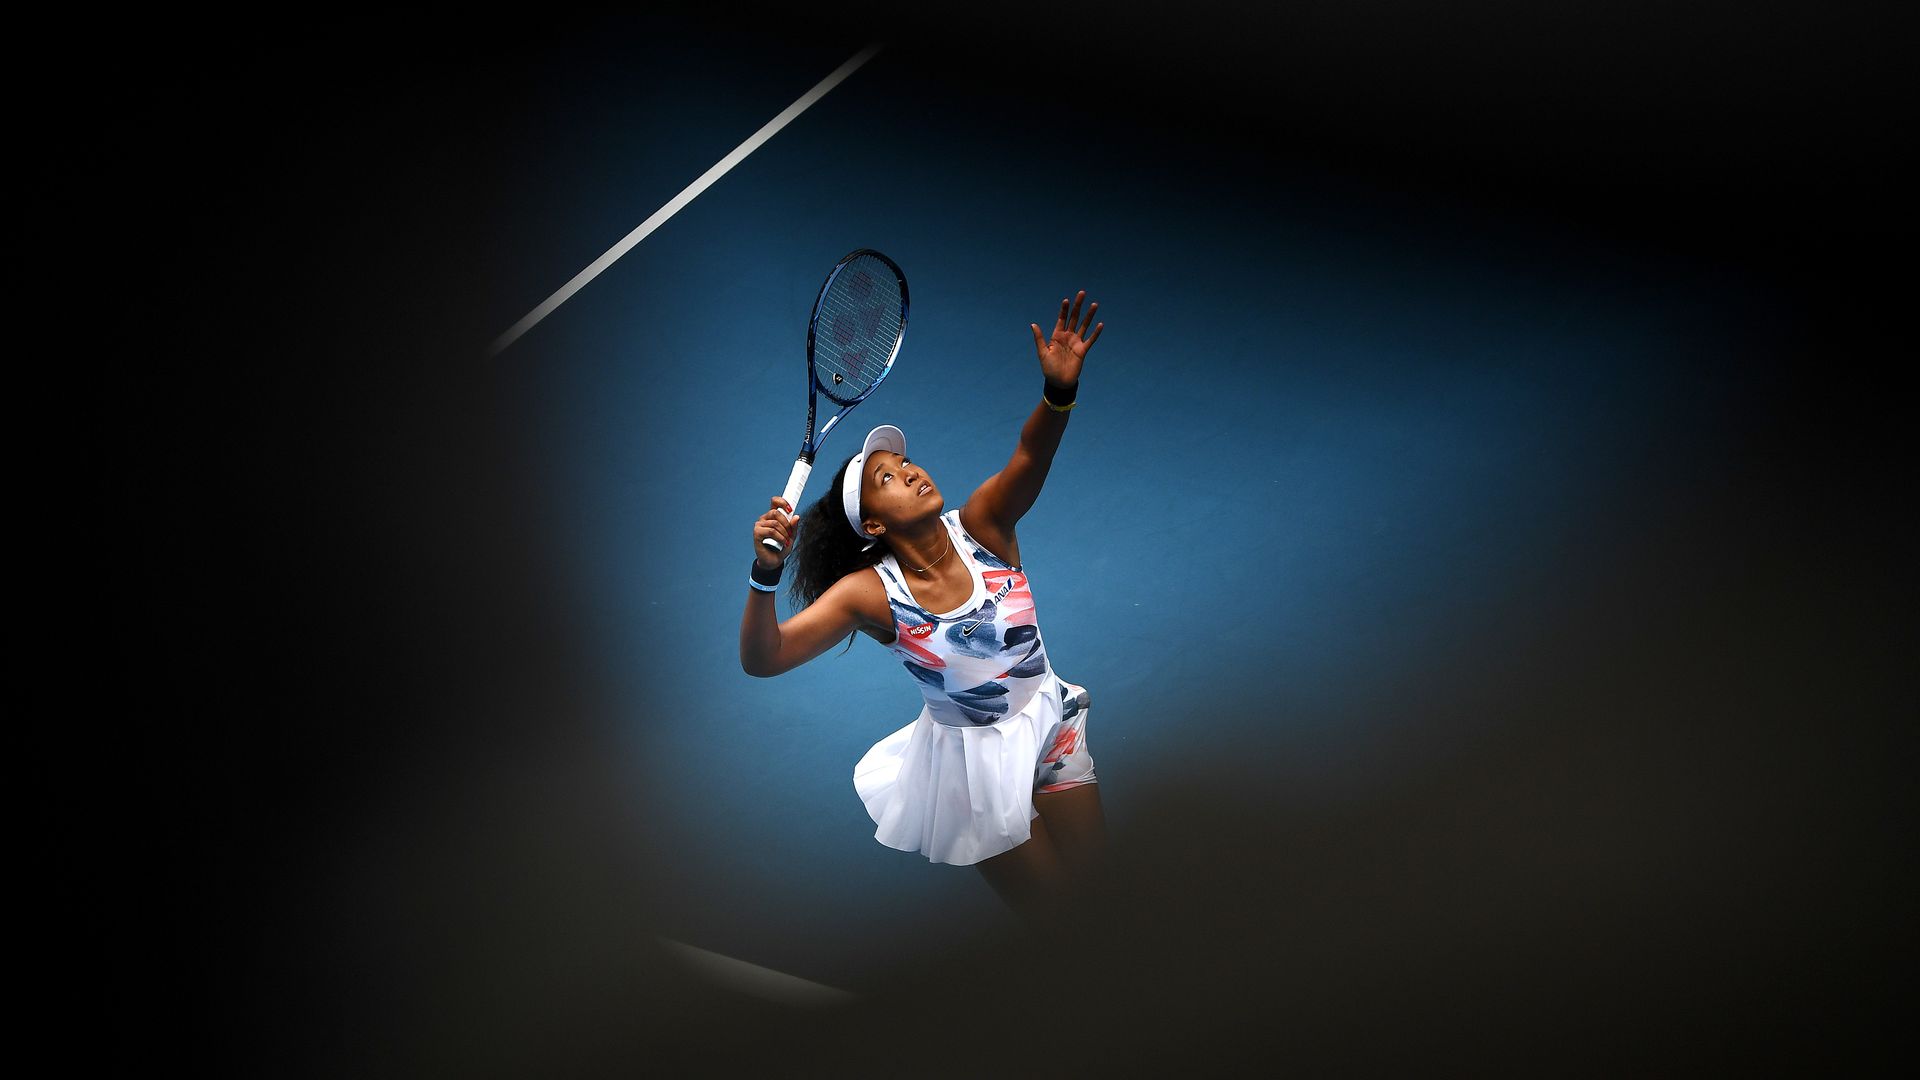 Naomi Osaka of Japan serves during her Women's Singles second round match against Saisai Zheng of China in January 2020.